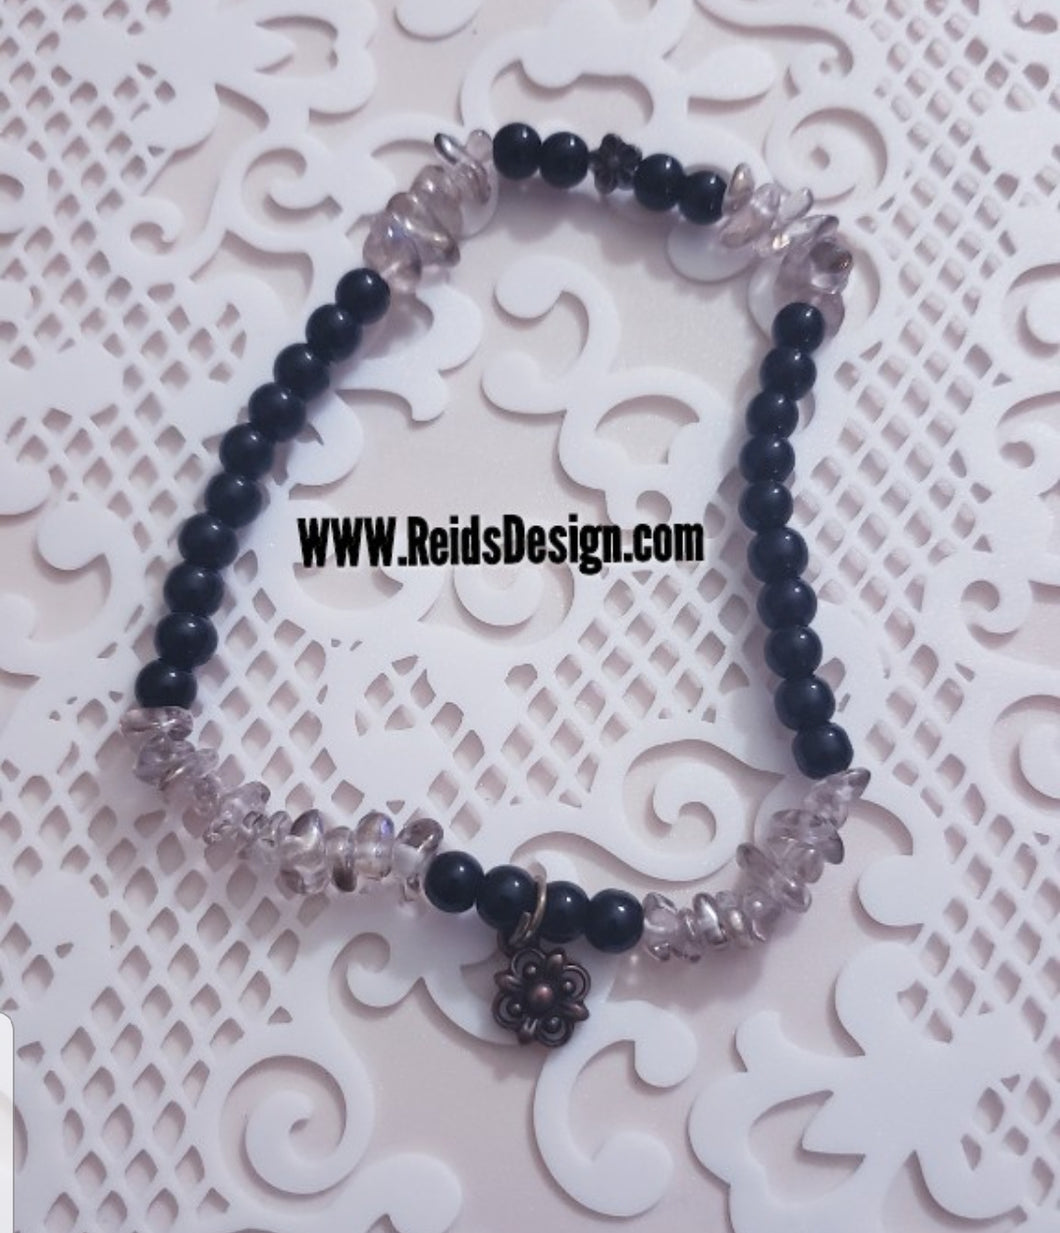 Sale...Bronze Flower with Black and Beige Beaded Anklet